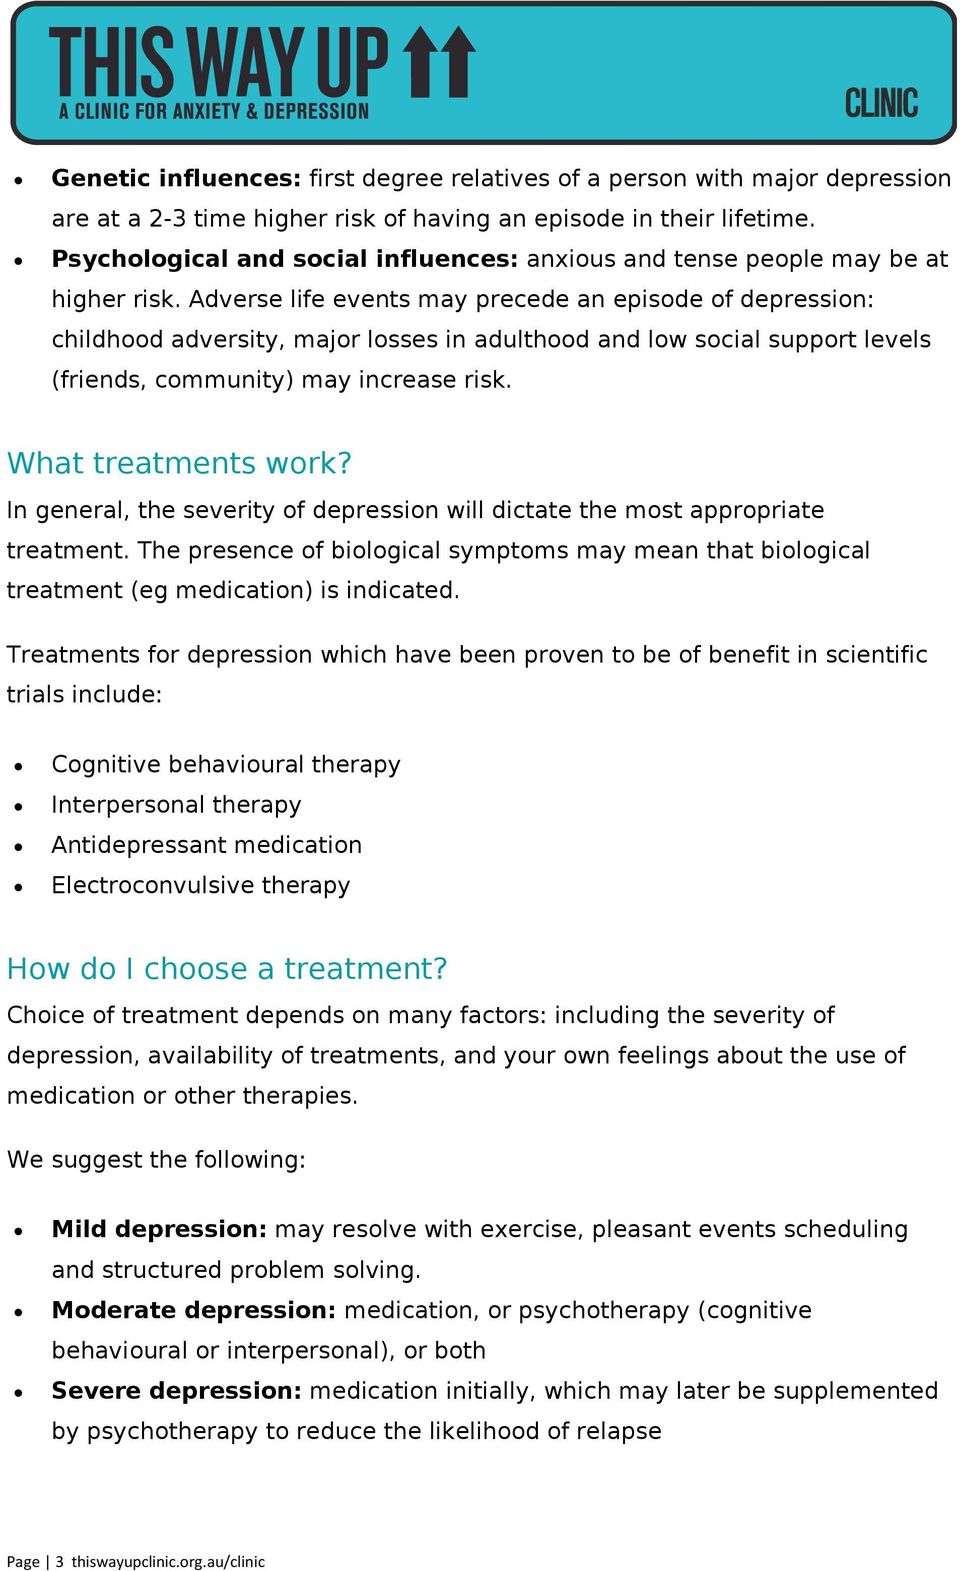 Adverse life events may precede an episode of depression: childhood adversity, major losses in adulthood and low social support levels (friends, community) may increase risk. What treatments work?